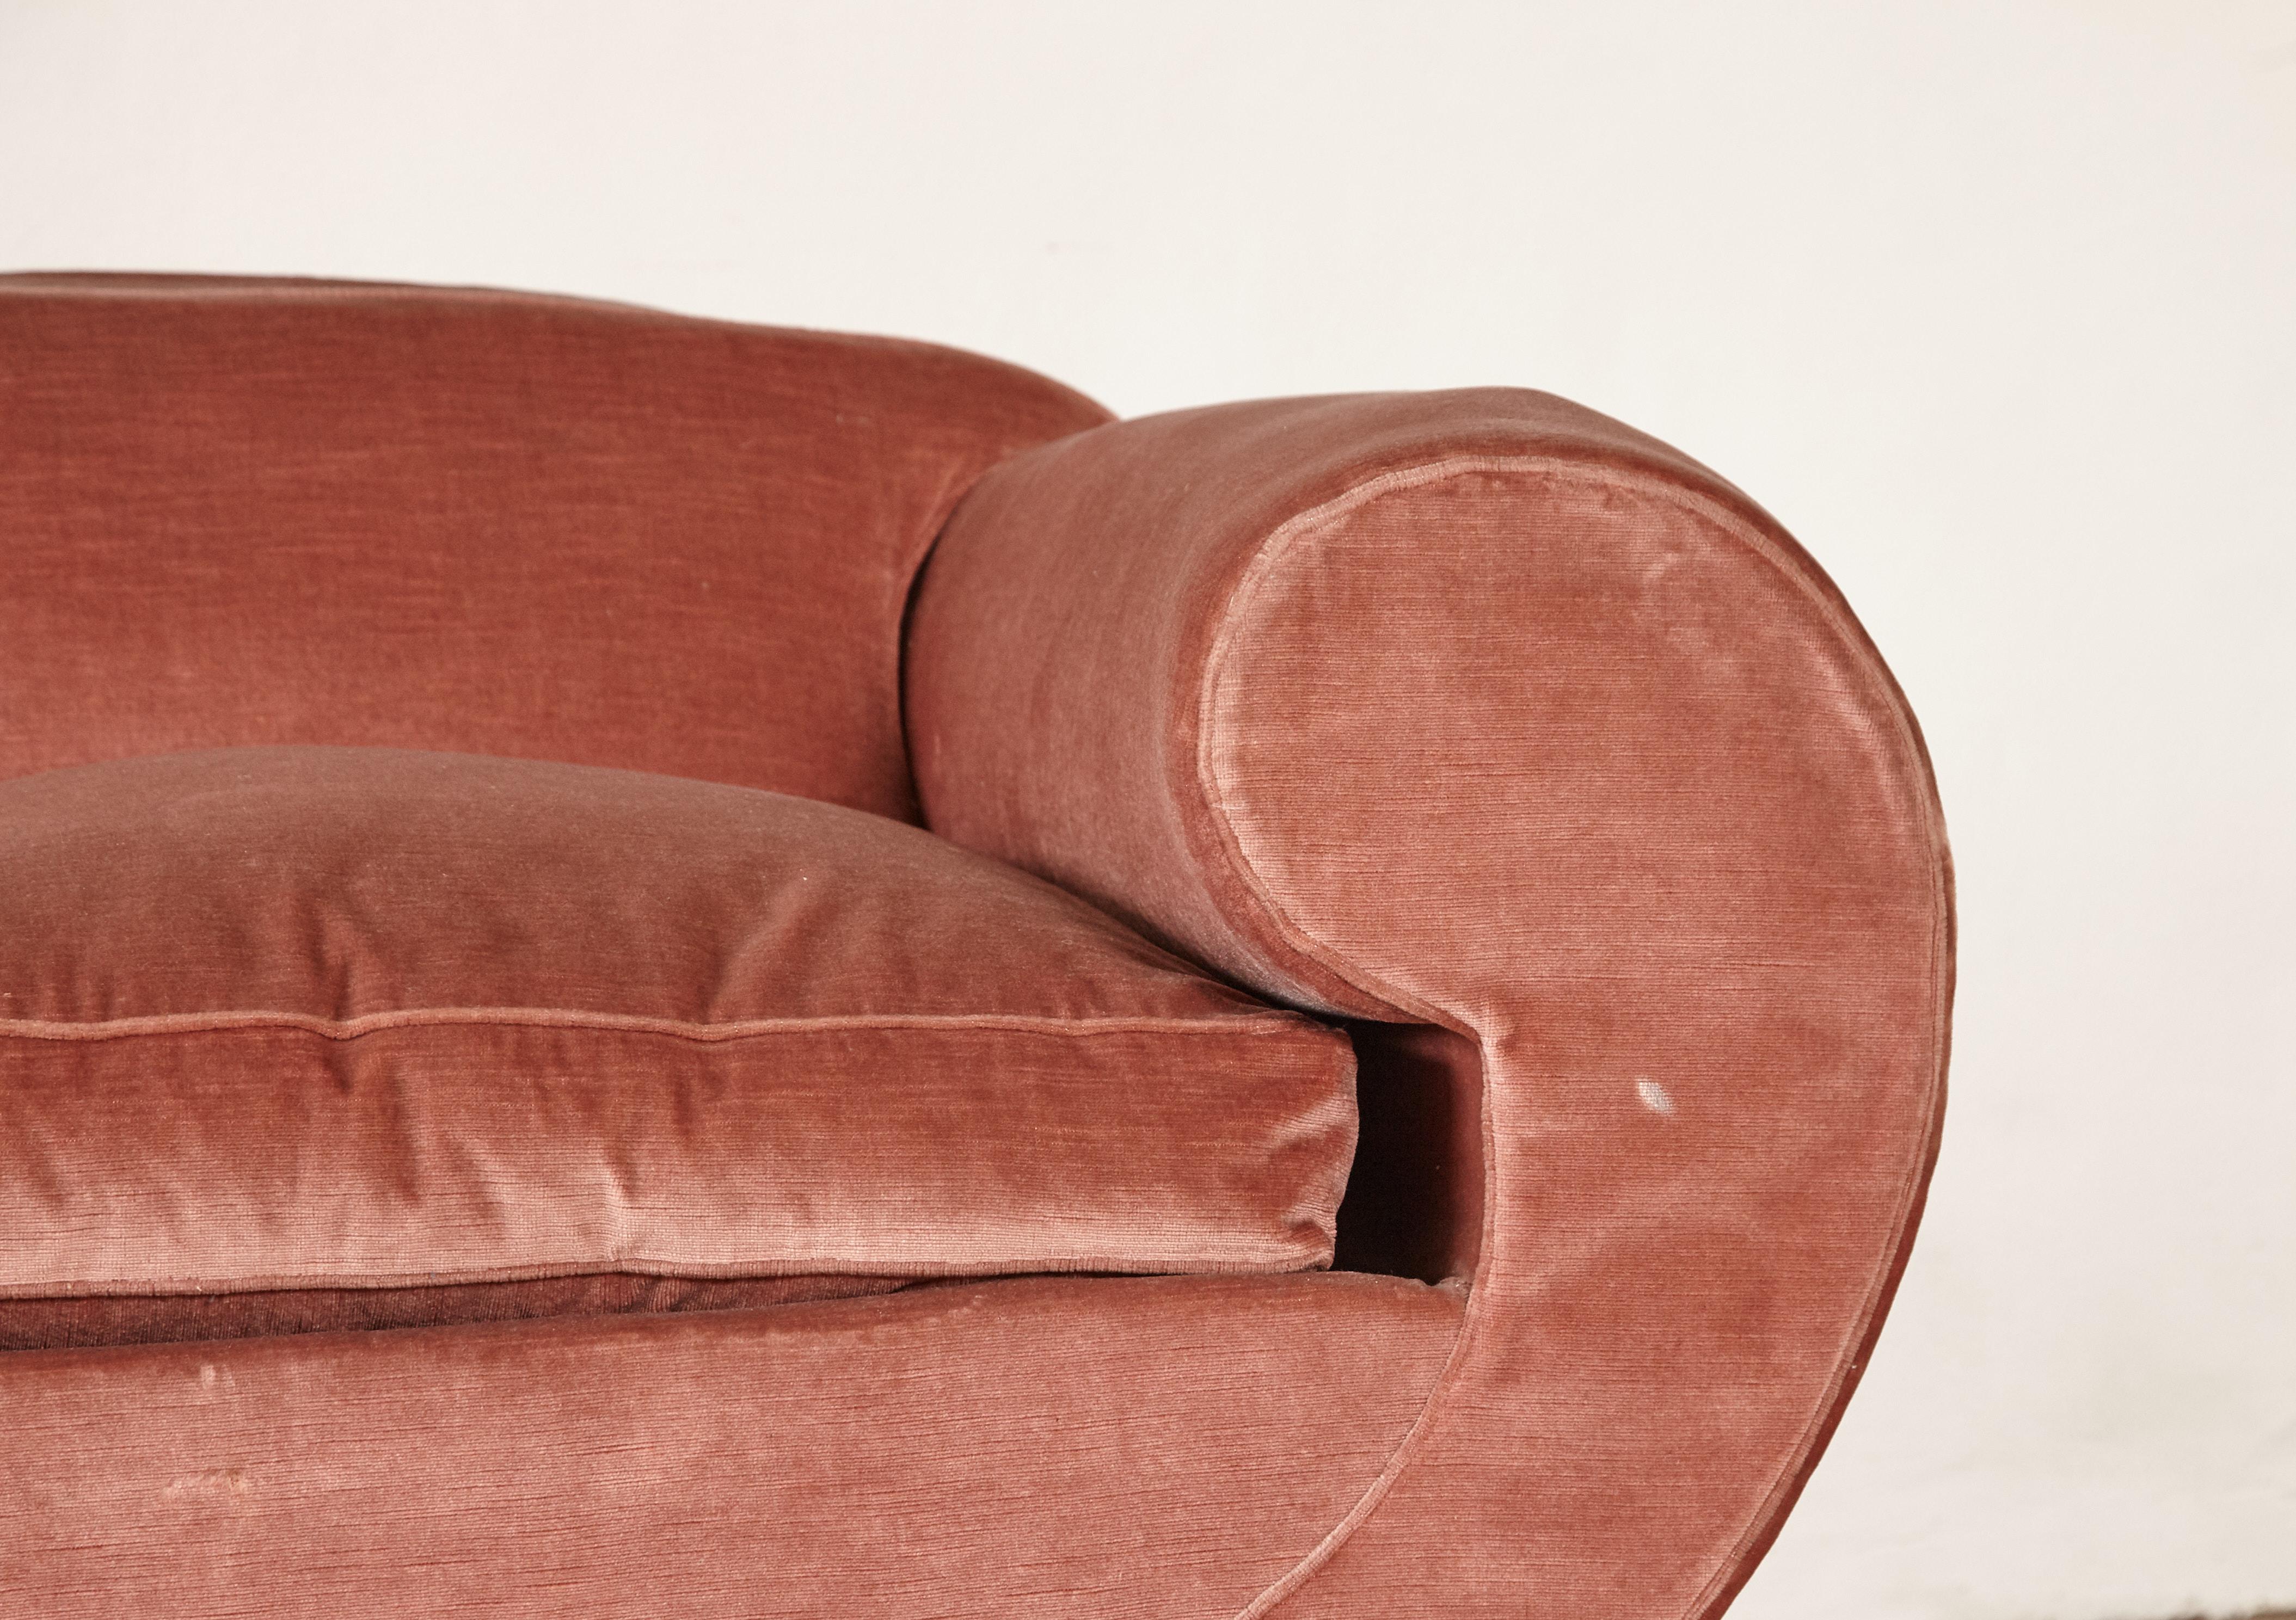 20th Century Superb 1950s Pink Sofa Attributed to Maison Gouffé, France, 1950s (UK)